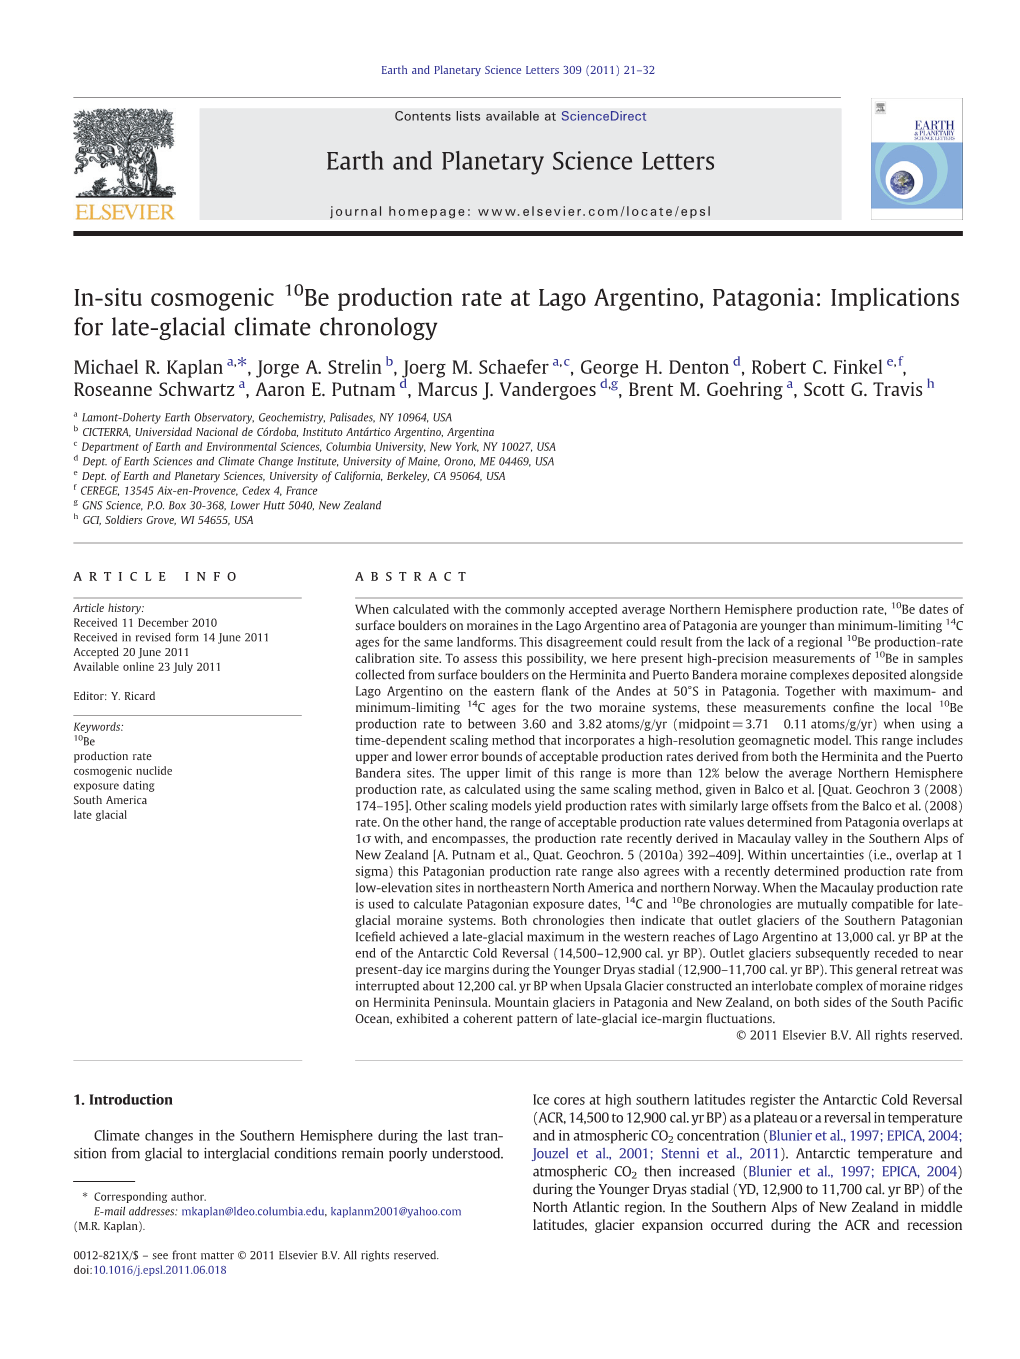 In-Situ Cosmogenic 10Be Production Rate at Lago Argentino, Patagonia: Implications for Late-Glacial Climate Chronology